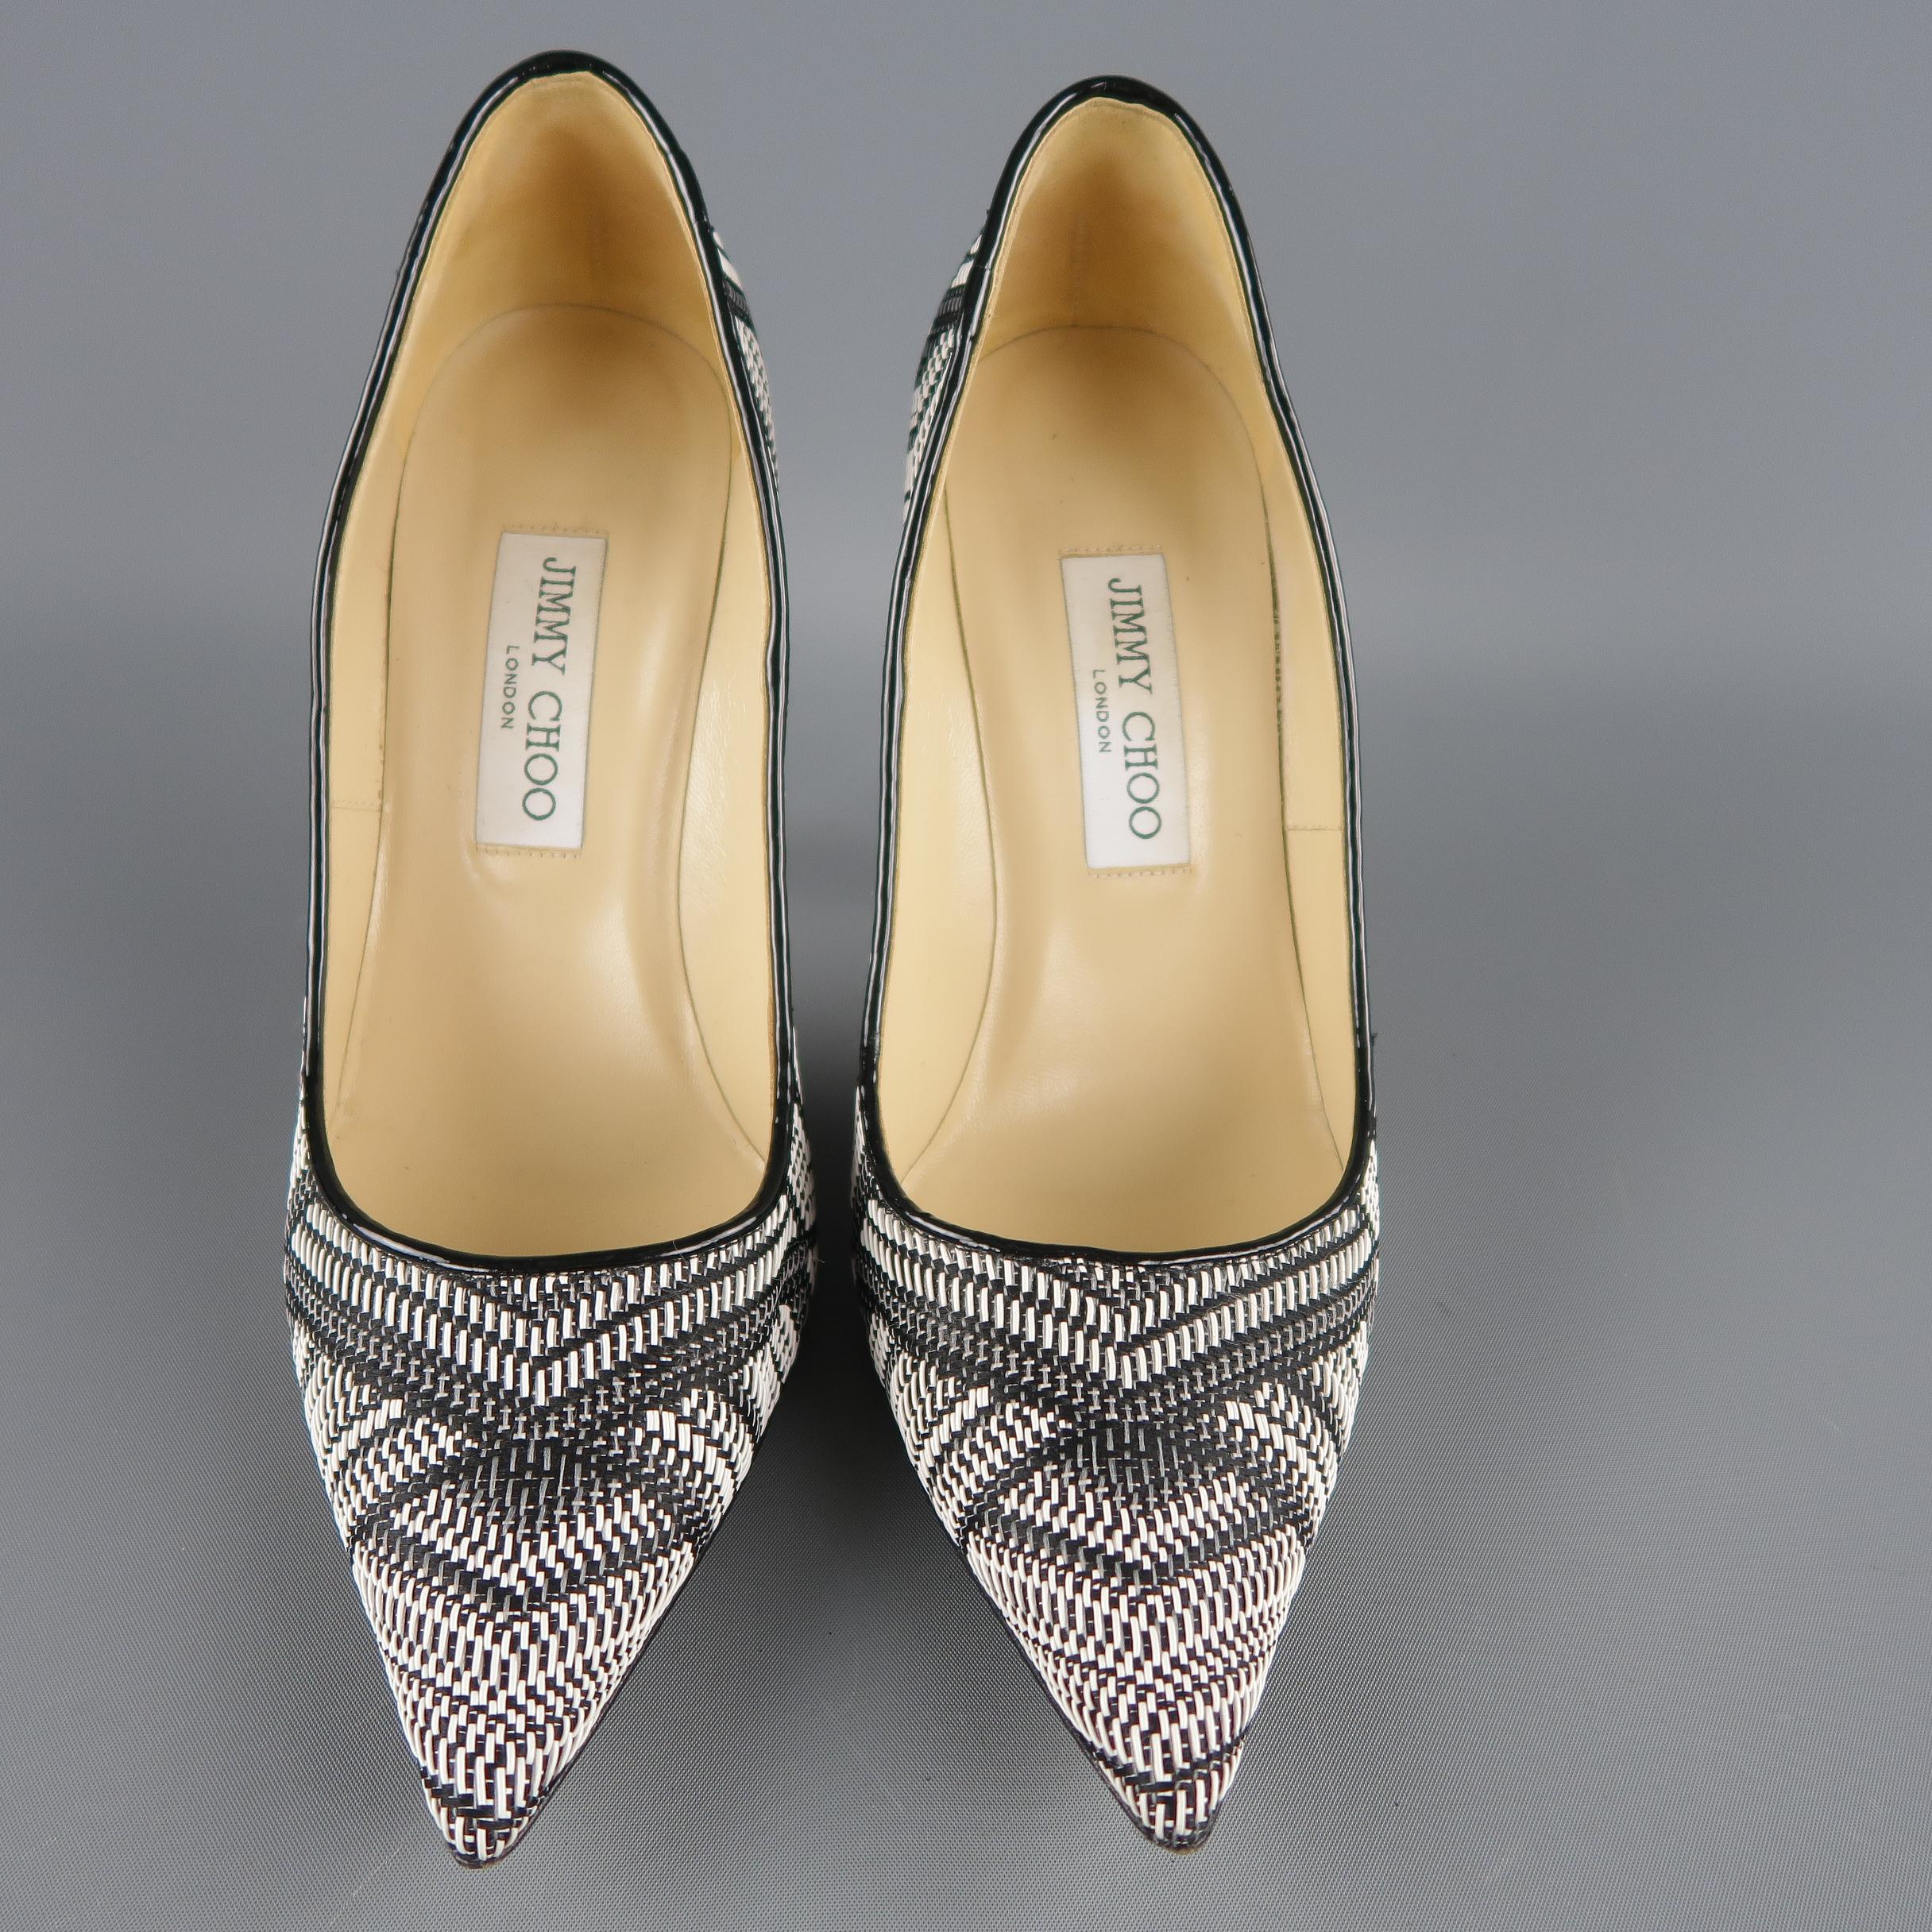 Women's JIMMY CHOO Size 9 Black & White Woven Fabric ABEL Pointed Pumps